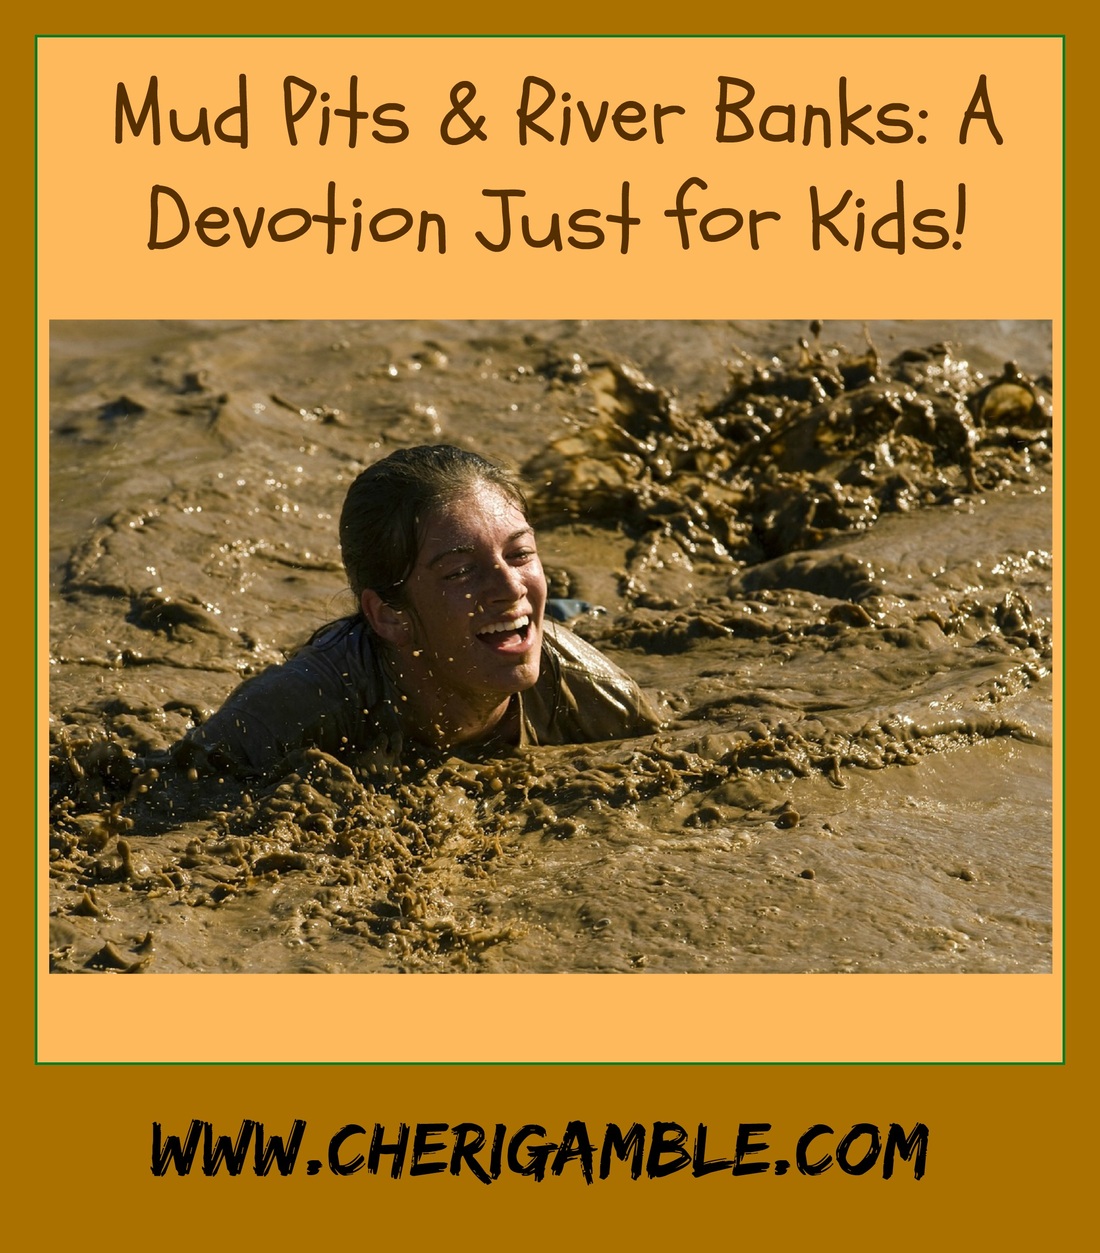 Mud Pits and River Banks: A Devotion Just for Kids